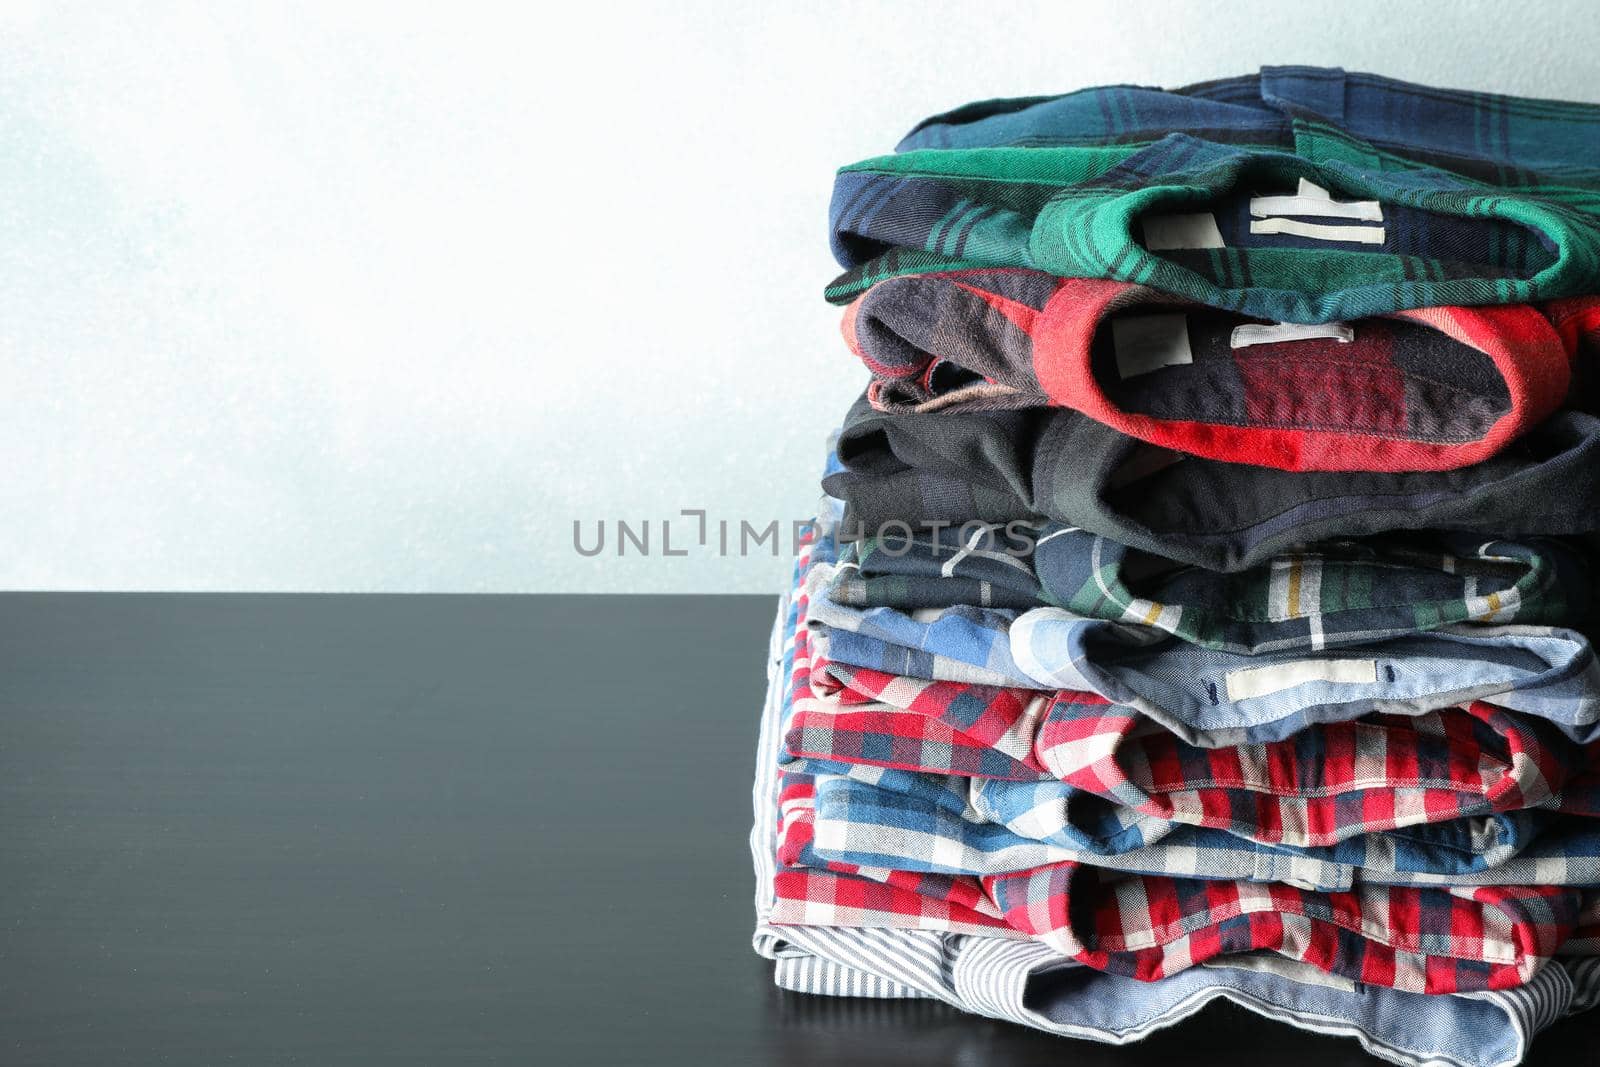 Stack of different shirts on black table, space for text